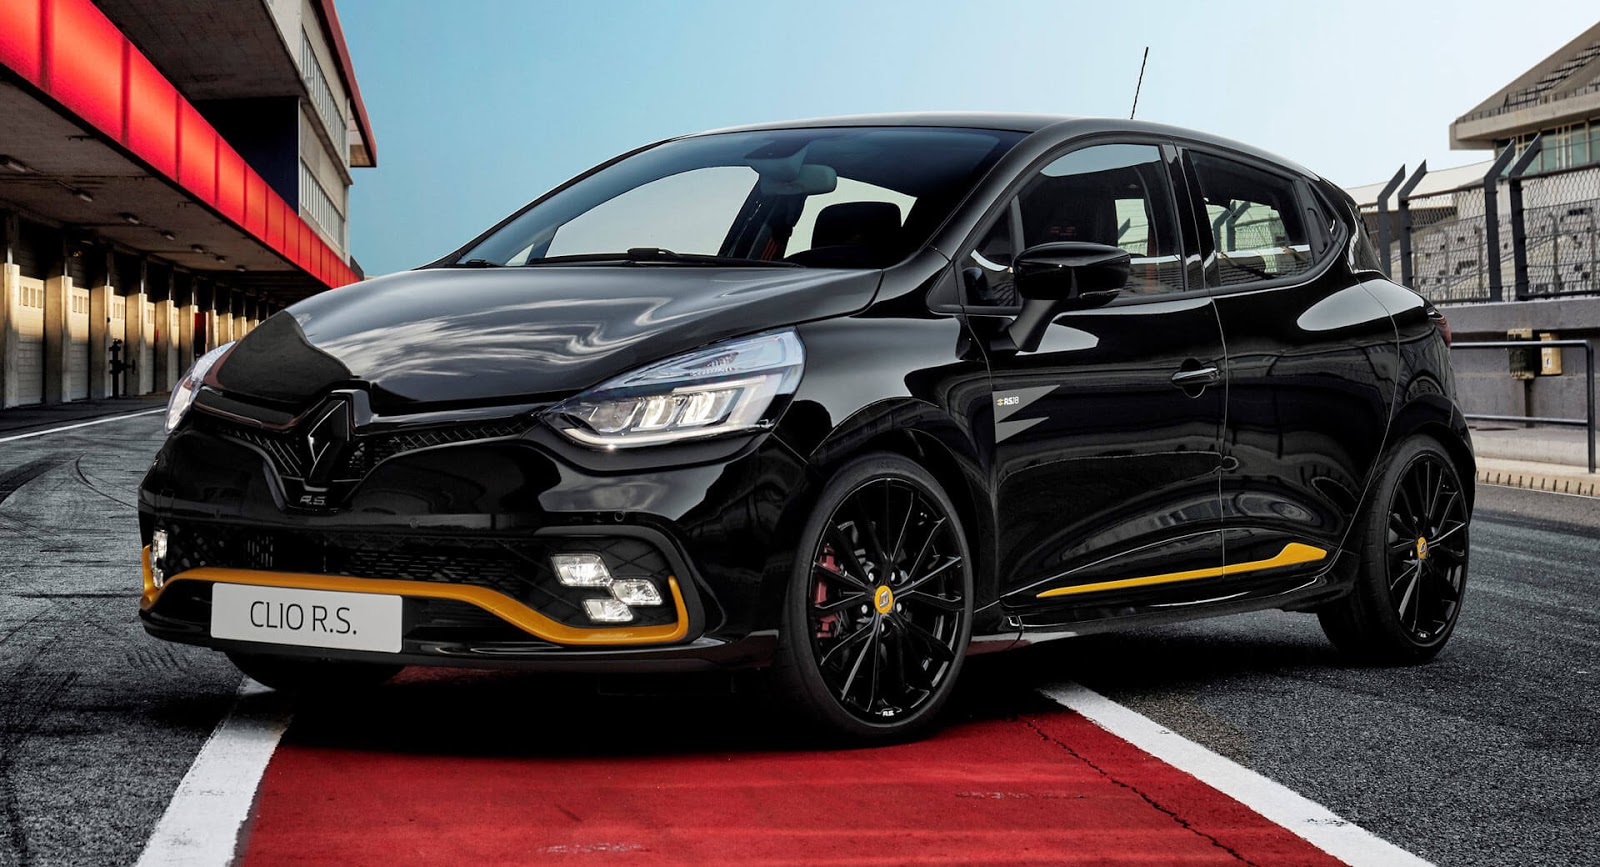 Renault Clio 4 RS 200 with 1.6-Liter Turbo Actually Makes 181 HP